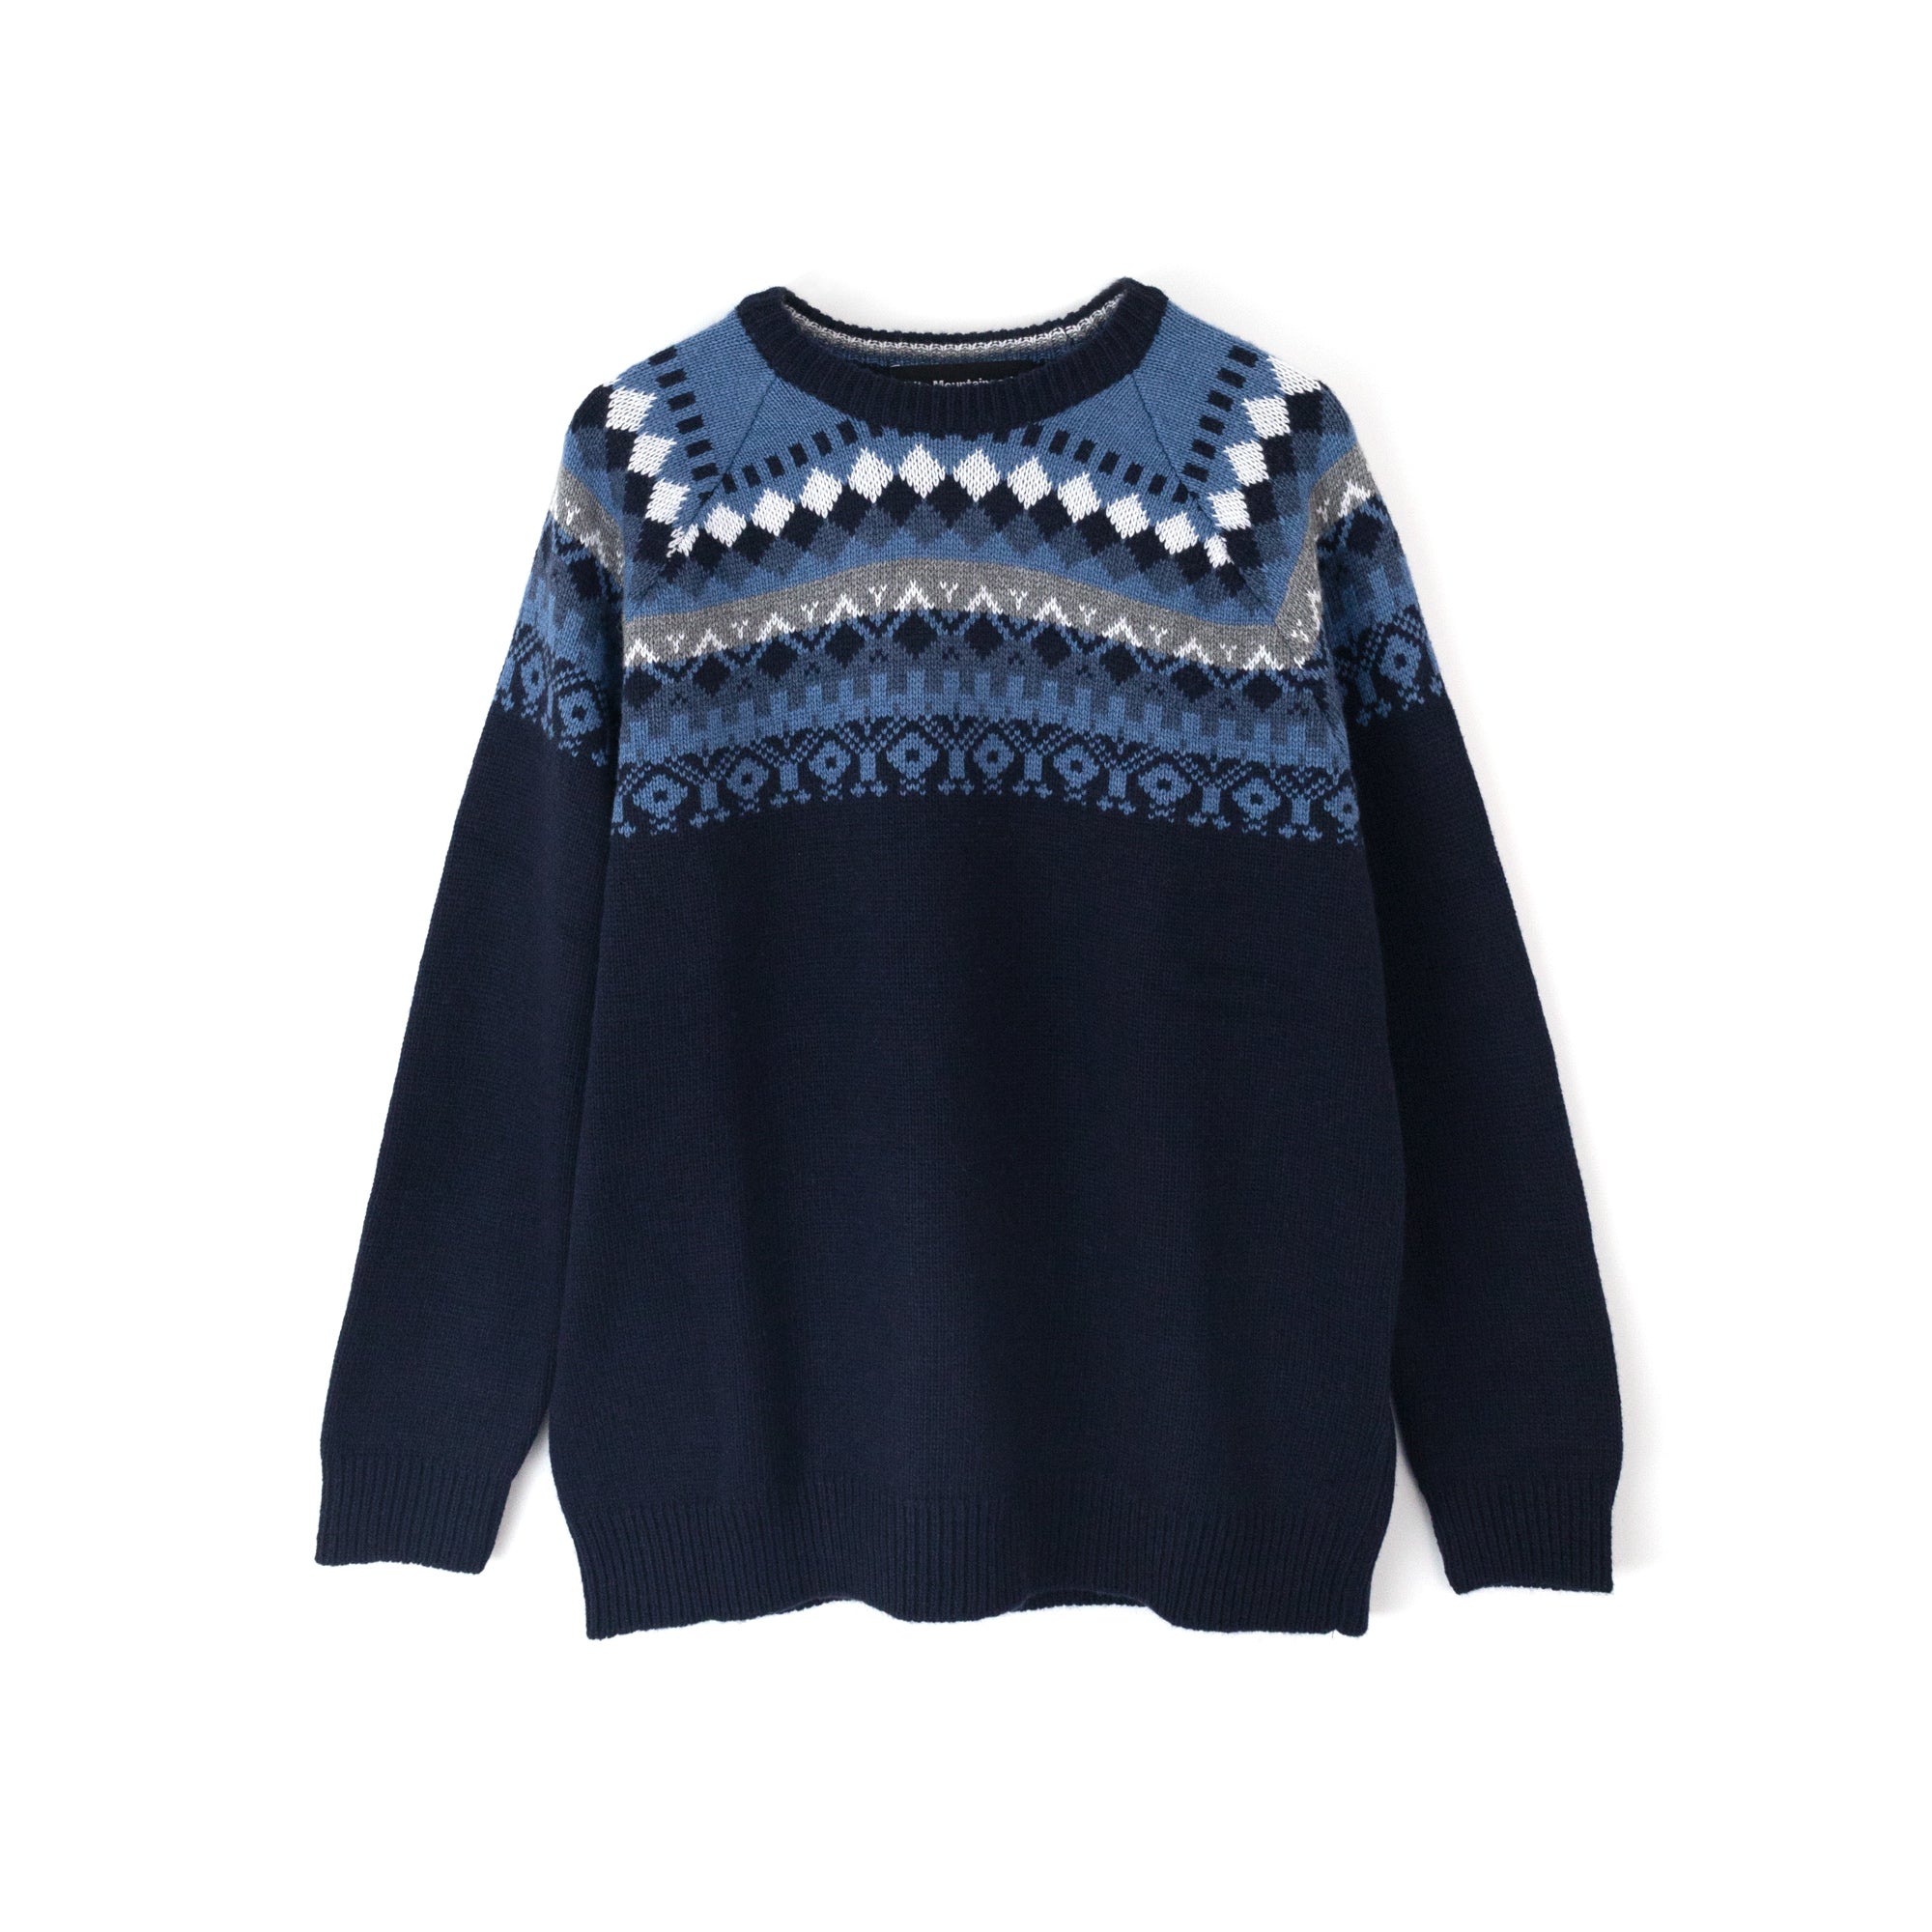 White Mountaineering 】NORDIC PETTERN CREWNECK KNIT NAVY – All